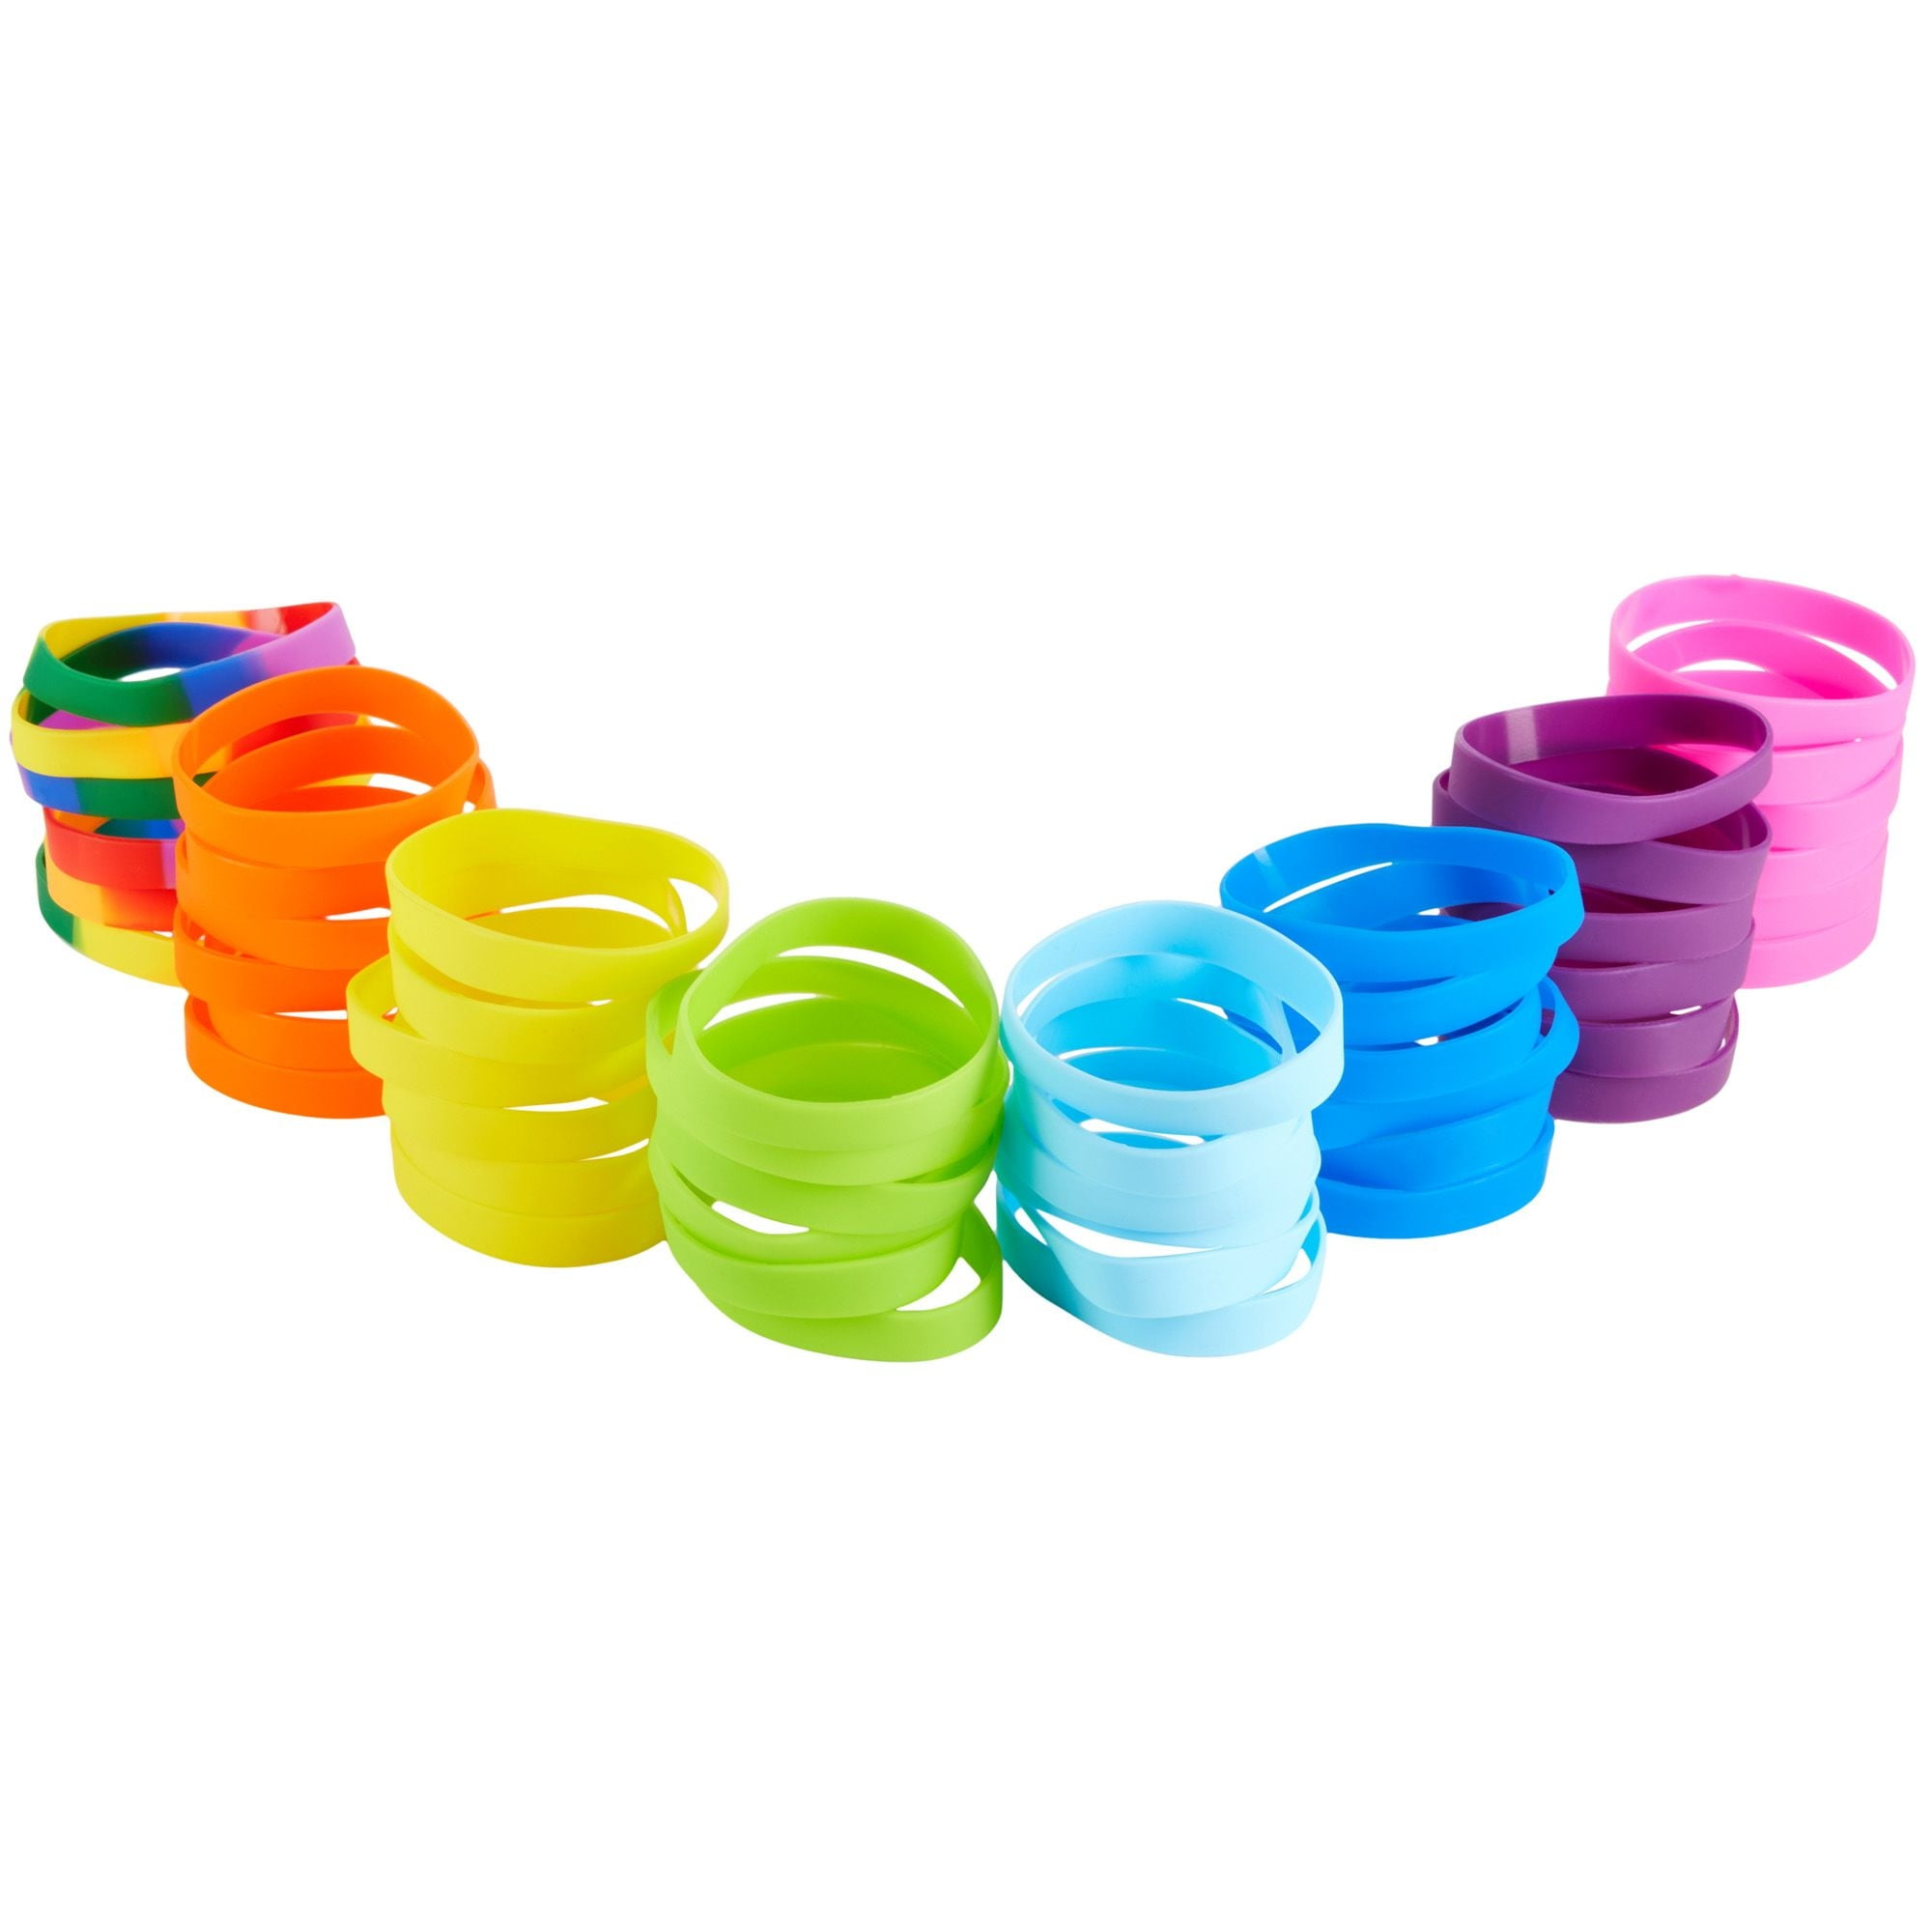 48 Pack Multi-Colored Silicone Bracelets Bulk Set for Sports Teams, Games,  Colored Wrist Bands for Sublimation, 8 Colors, 8 in 